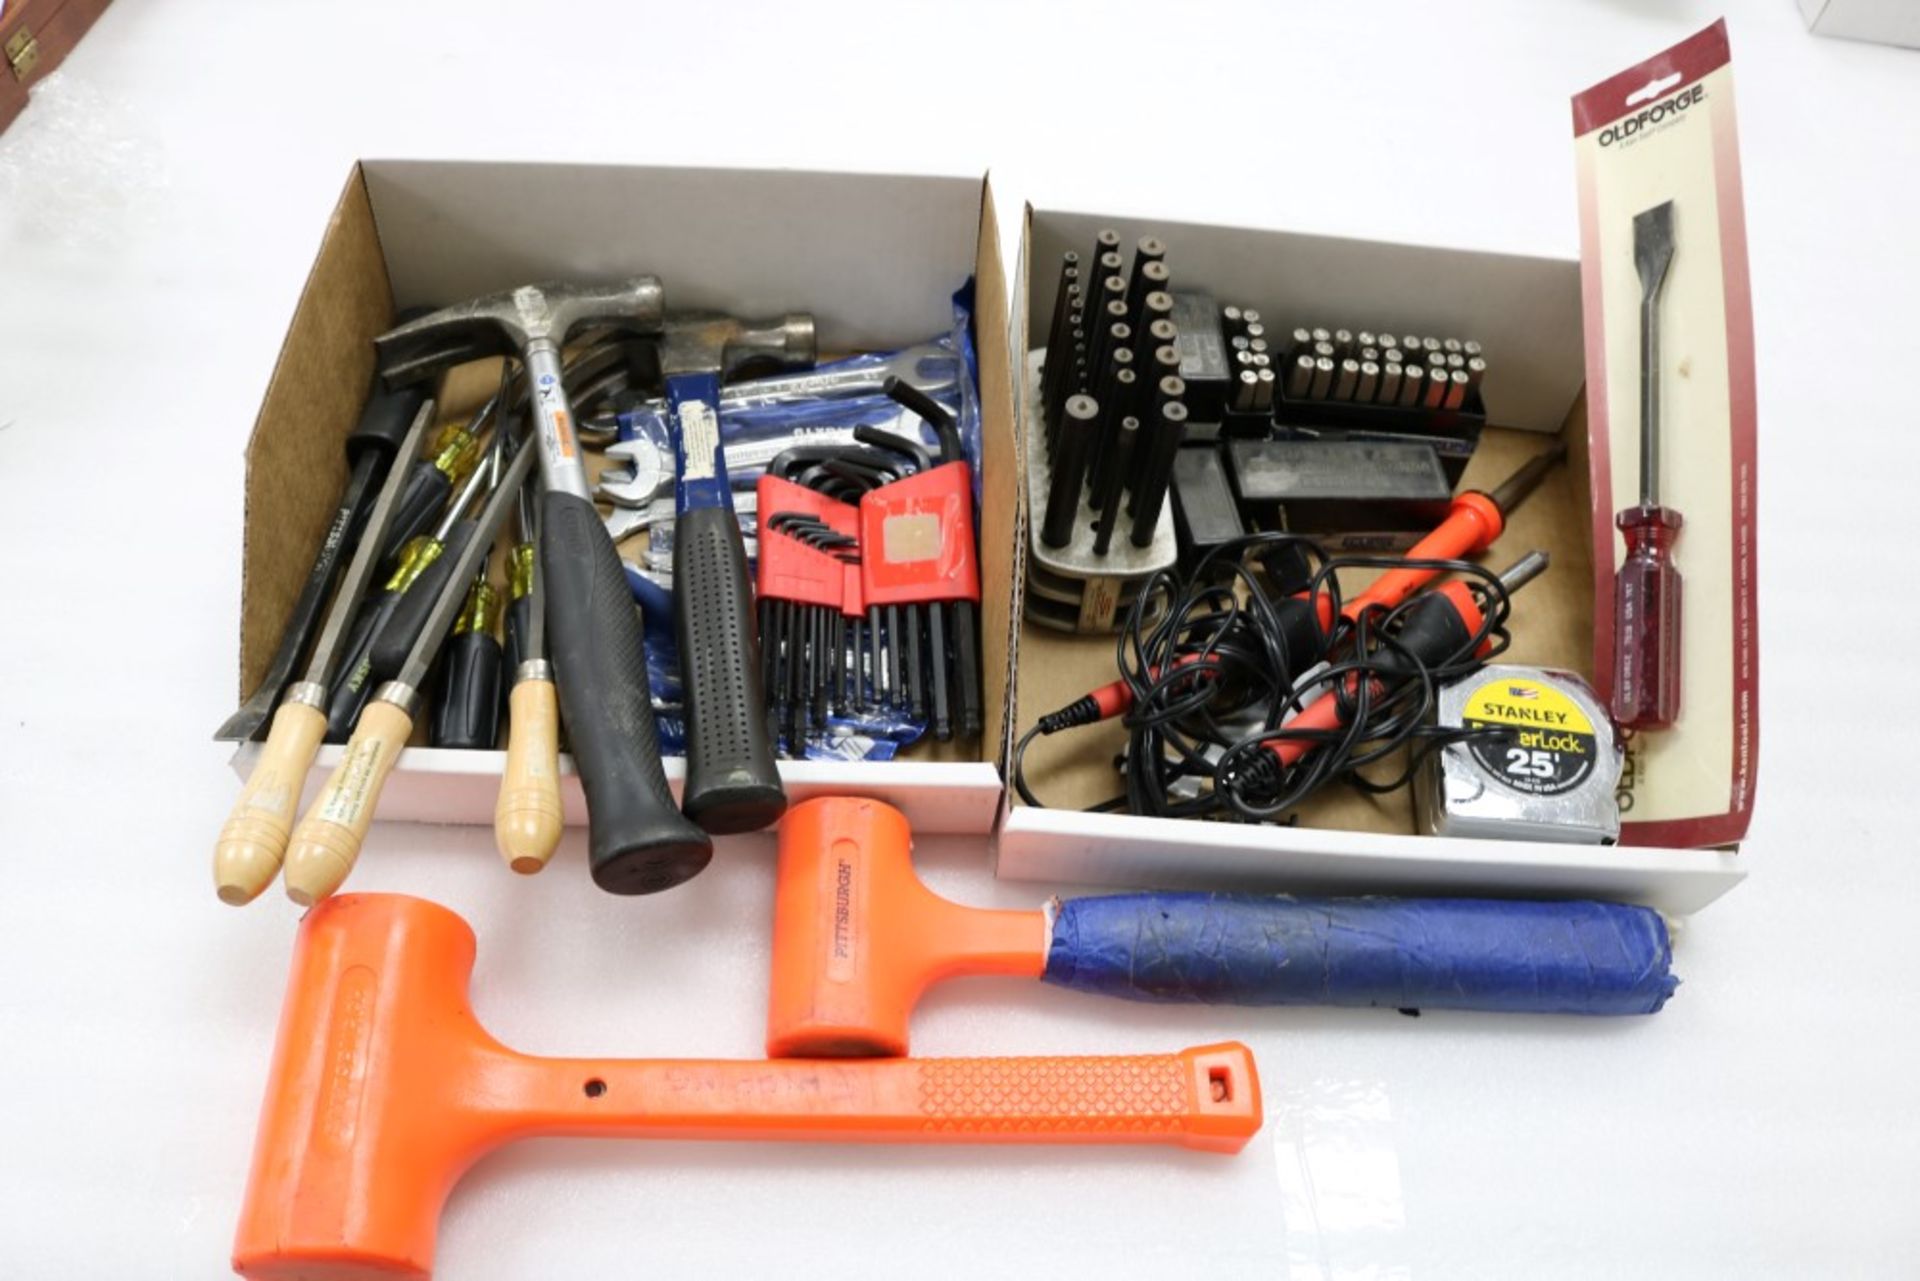 Box of Hammers, Wrenches, Allen Keys, Flat Heads and Screw Drivers. Letter and Number Marking